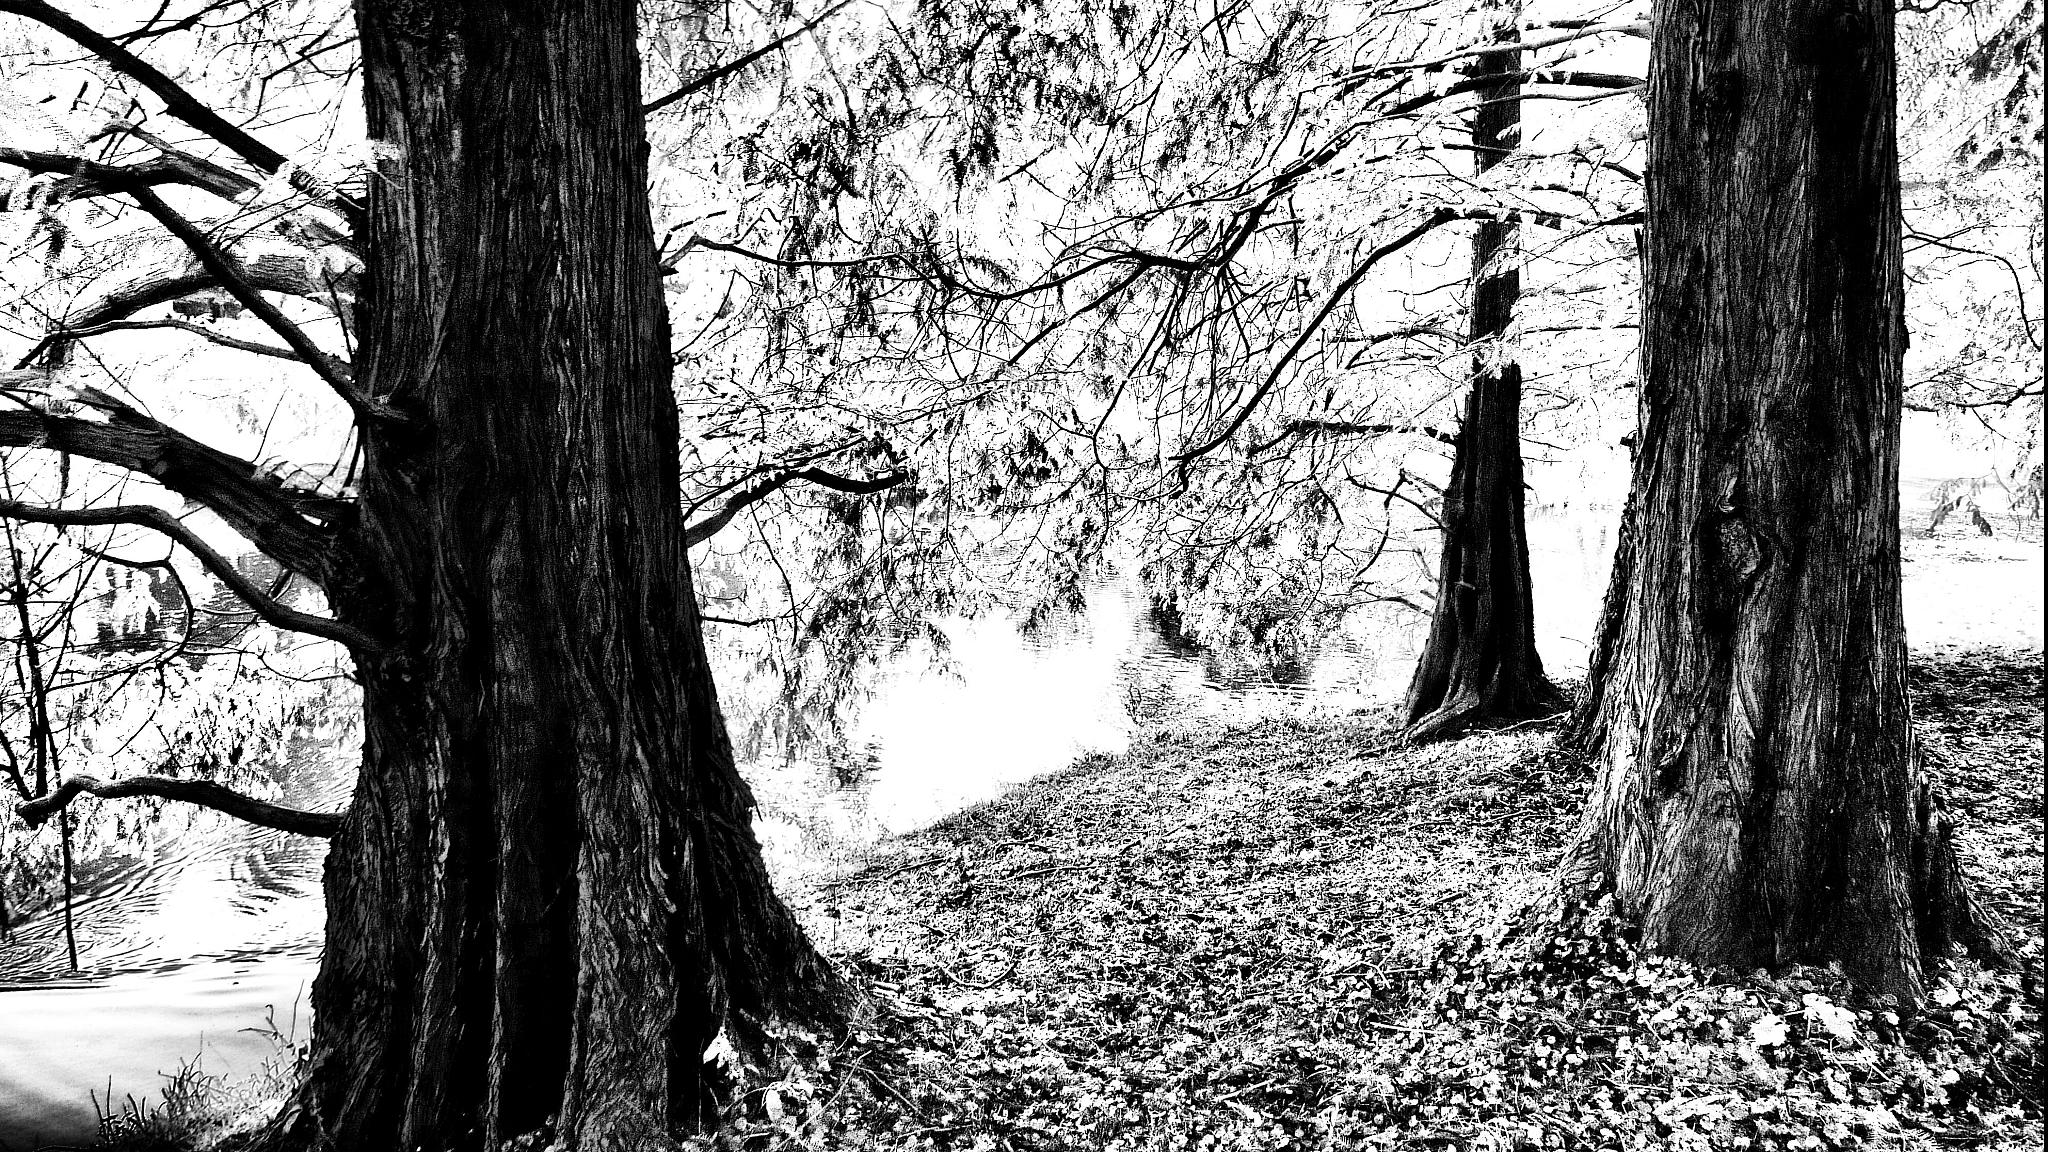 the black and white image is of a forest